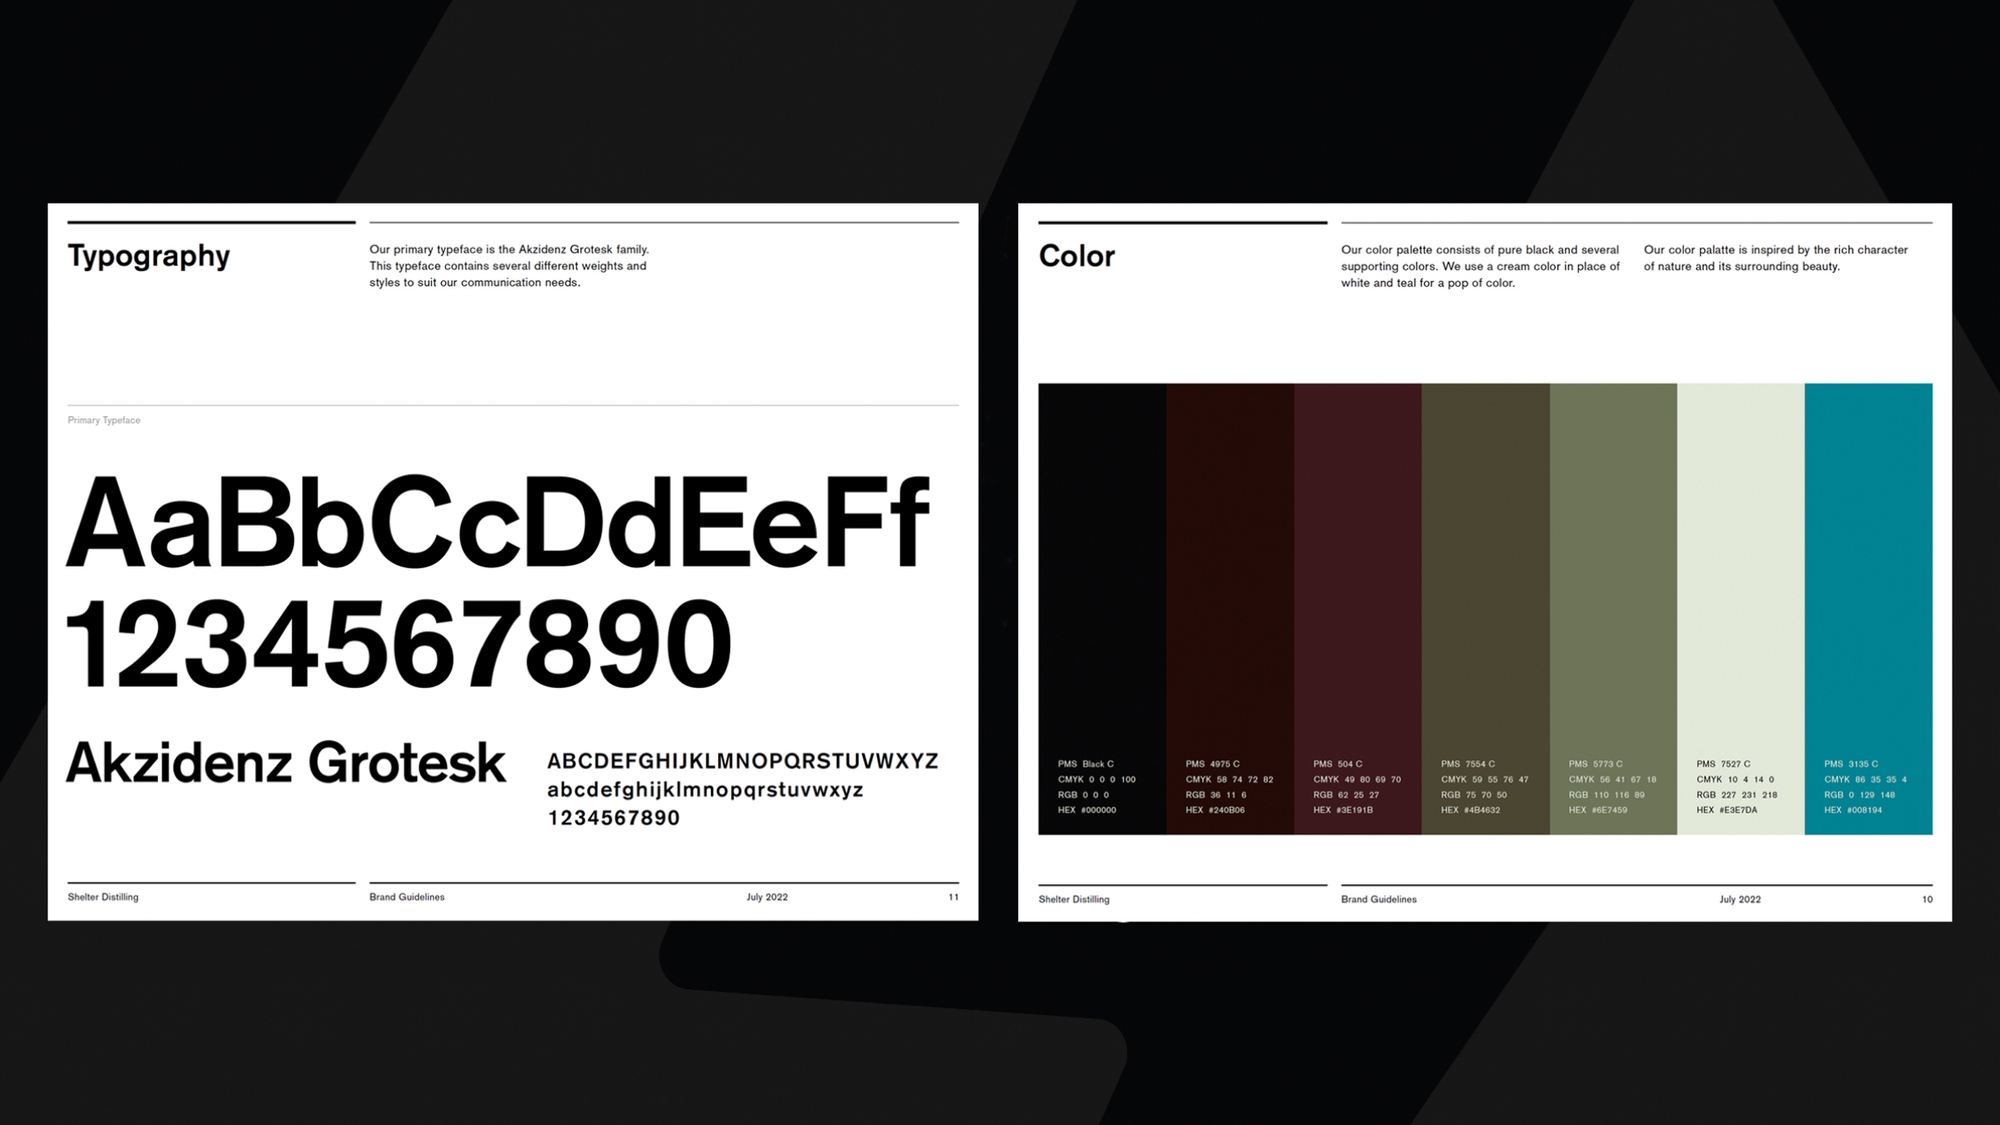 Shelter Distilling brand guidelines showing typography and colors